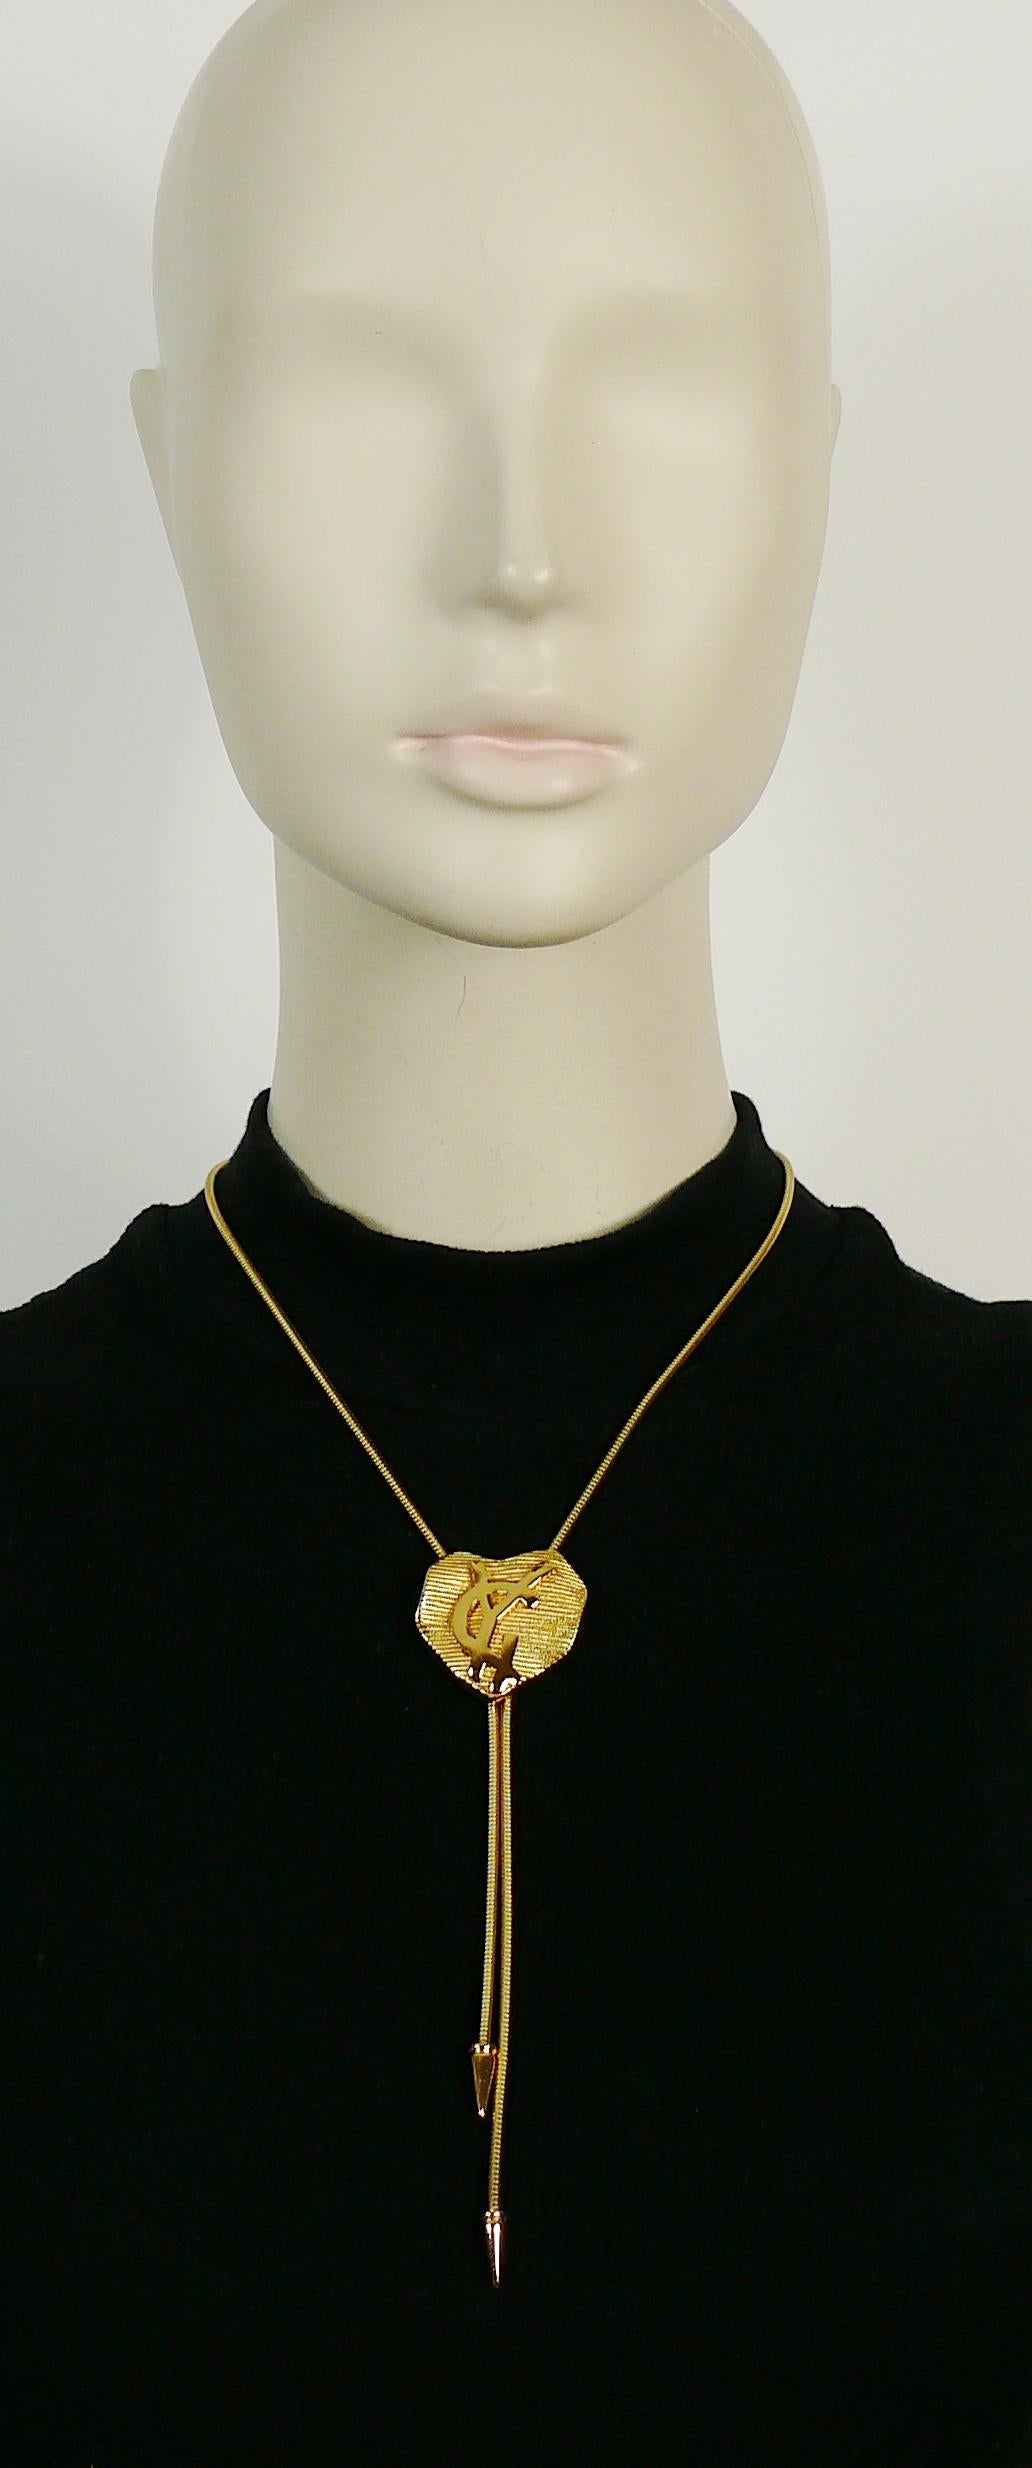 YVES SAINT LAURENT vintage gold toned snake chain necklace featuring a ribbed heart pendant with embossed YSL logo.

Adjustable toggle clasp closure.

Marked YSL Made in France and YVES SAINT LAURENT signatures on the closures.

Indicative